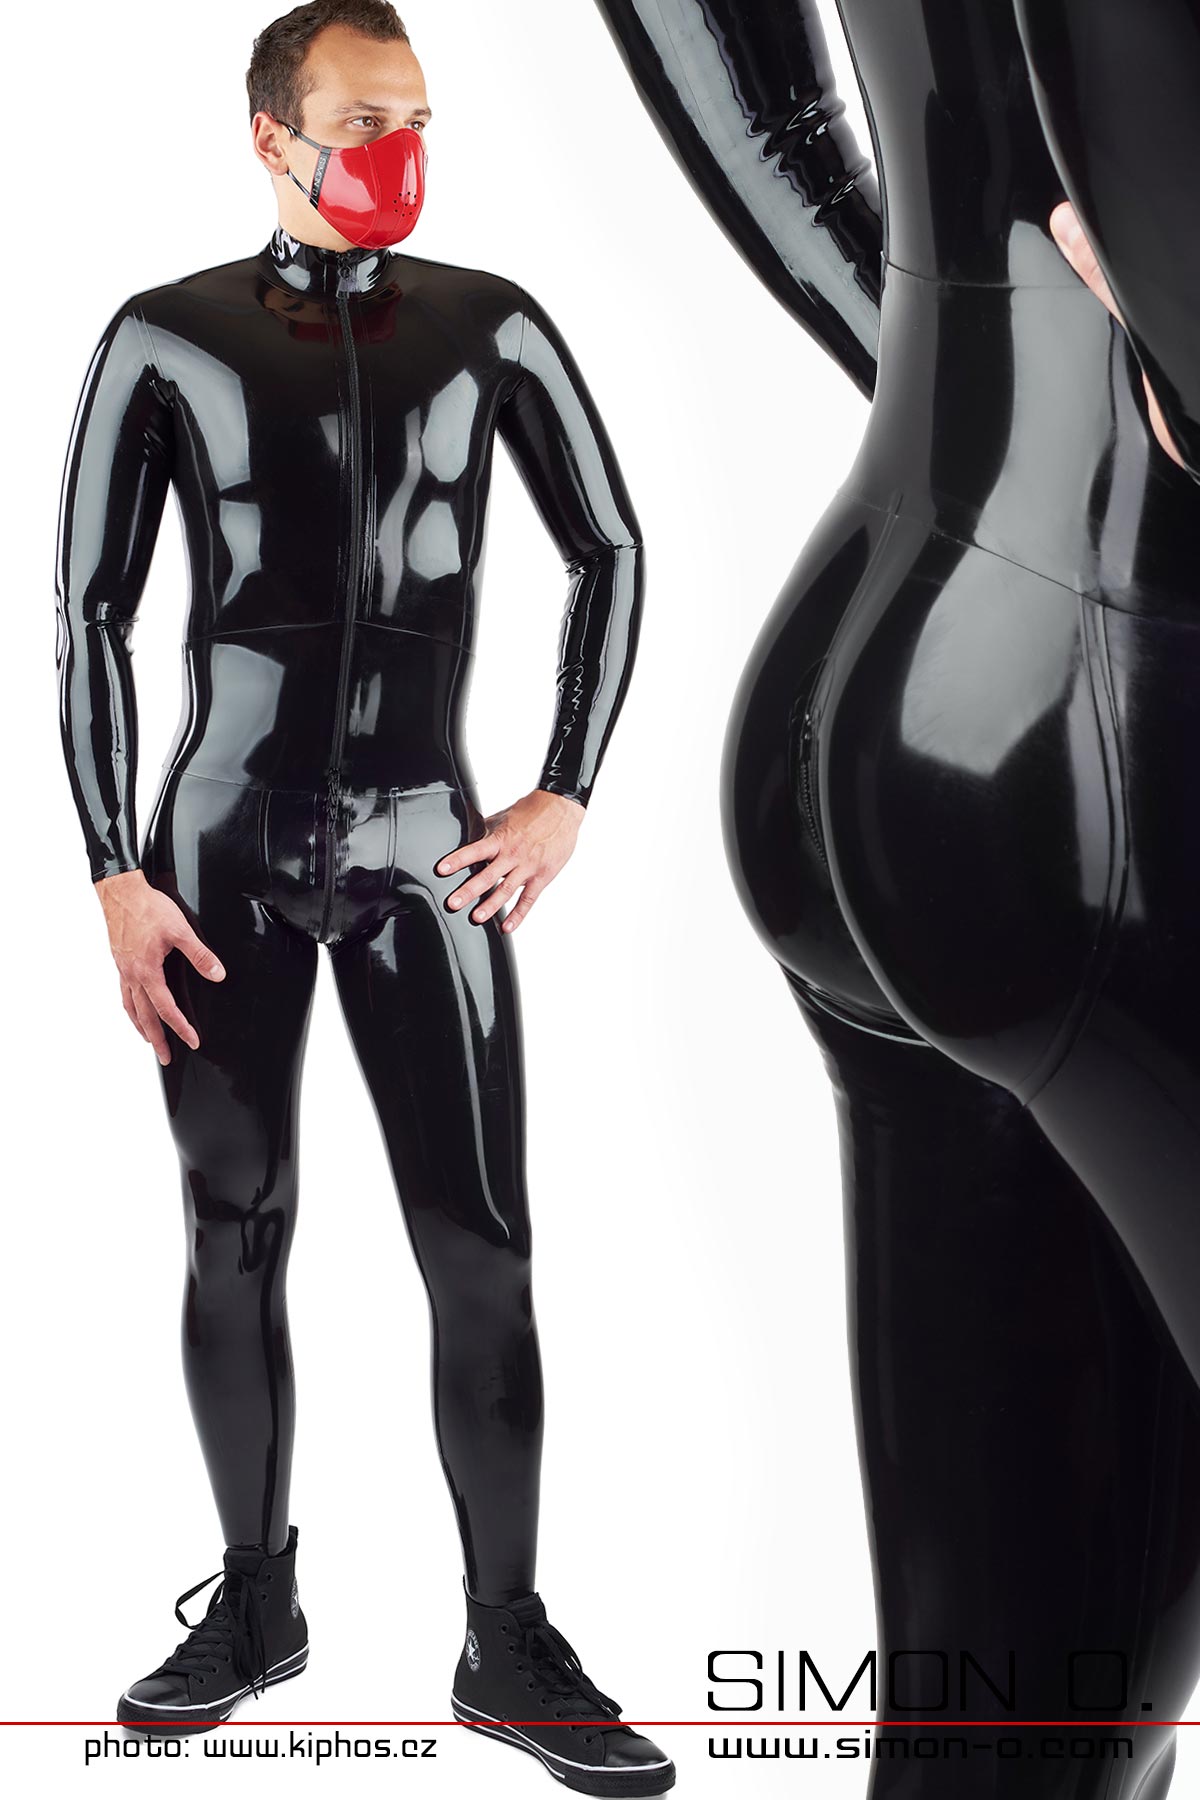 A man wears a shiny skintight latex suit in black with zip in front